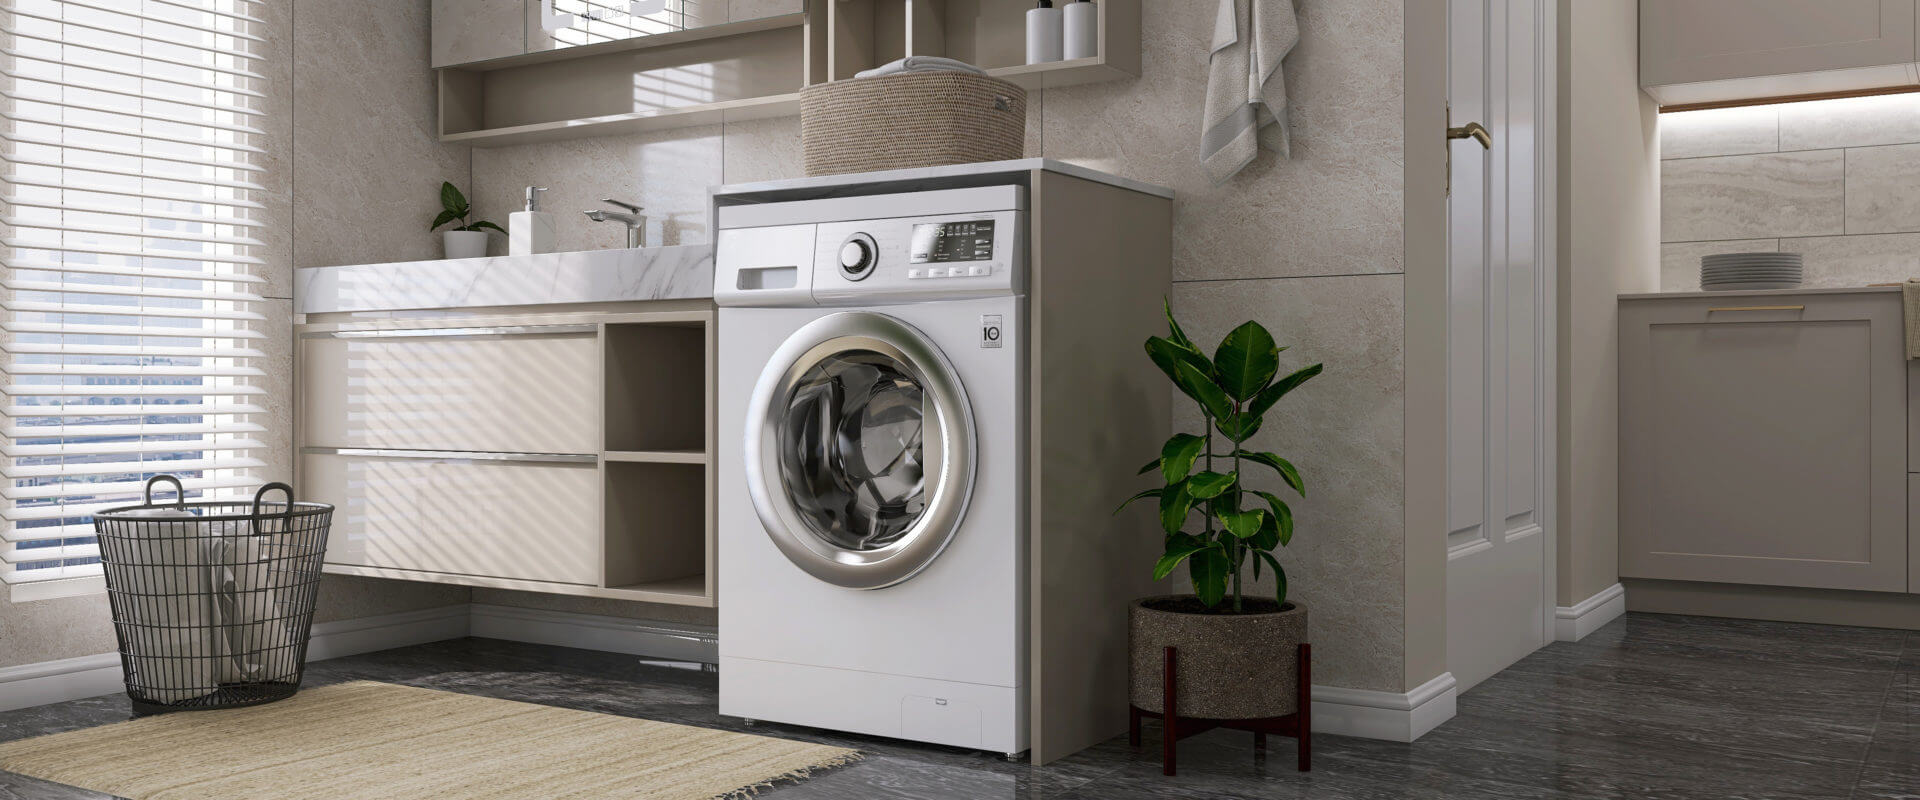 Tips to Transform Your Laundry Room to a Place You Enjoy